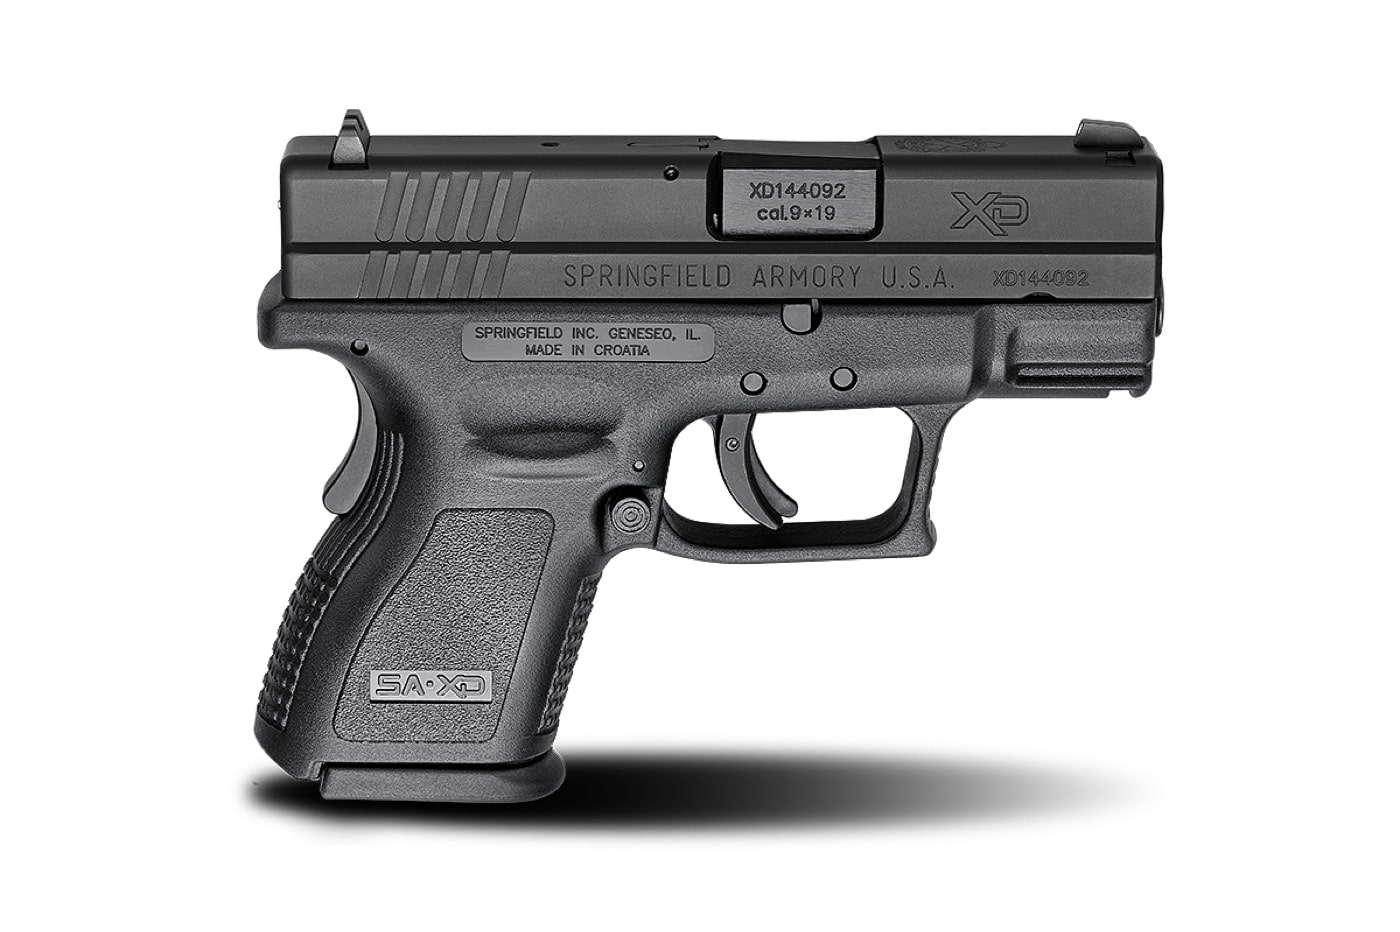 Shown in this photograph is an XD Sub-Compact 3-inch 9mm handgun. It compares well to the XD Tactical pistol in a head-to-head matchup.